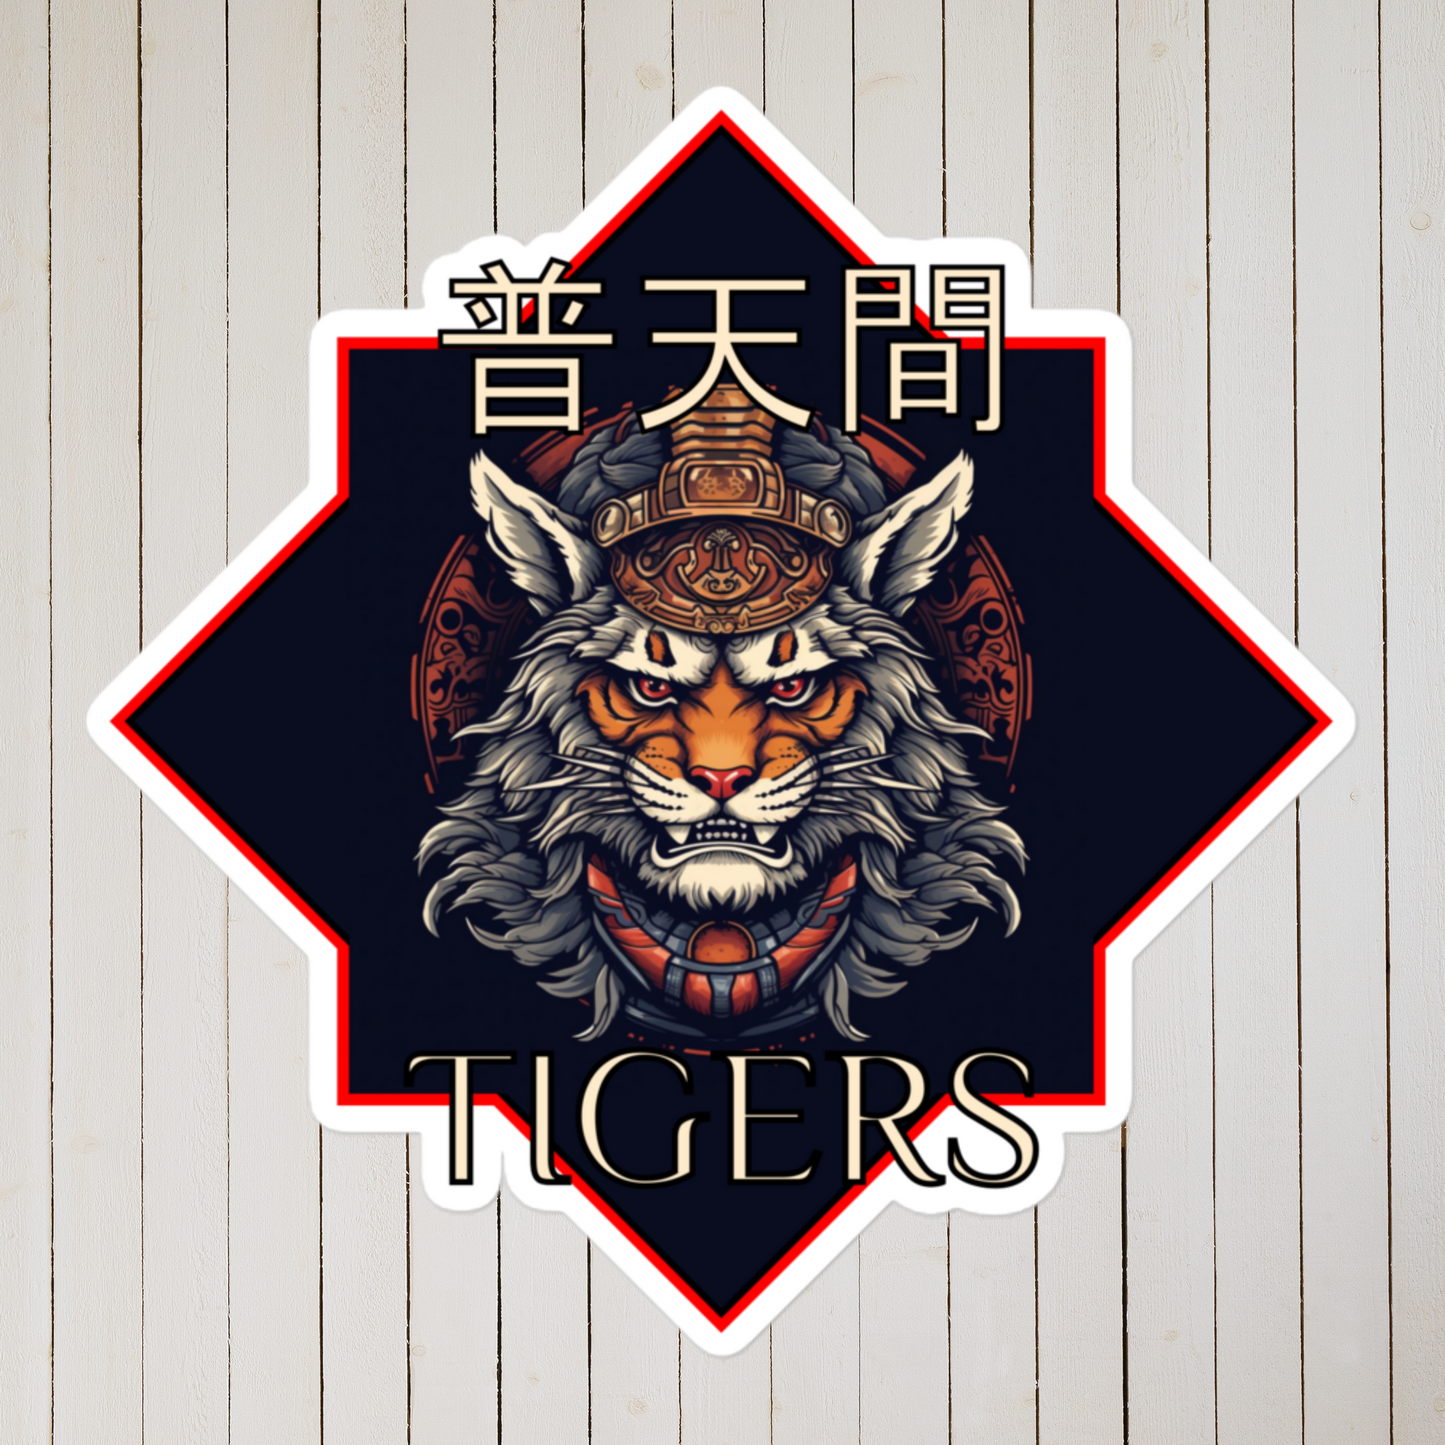 Flying Tigers Samurai Edition VMM-262 Bubble-free stickers